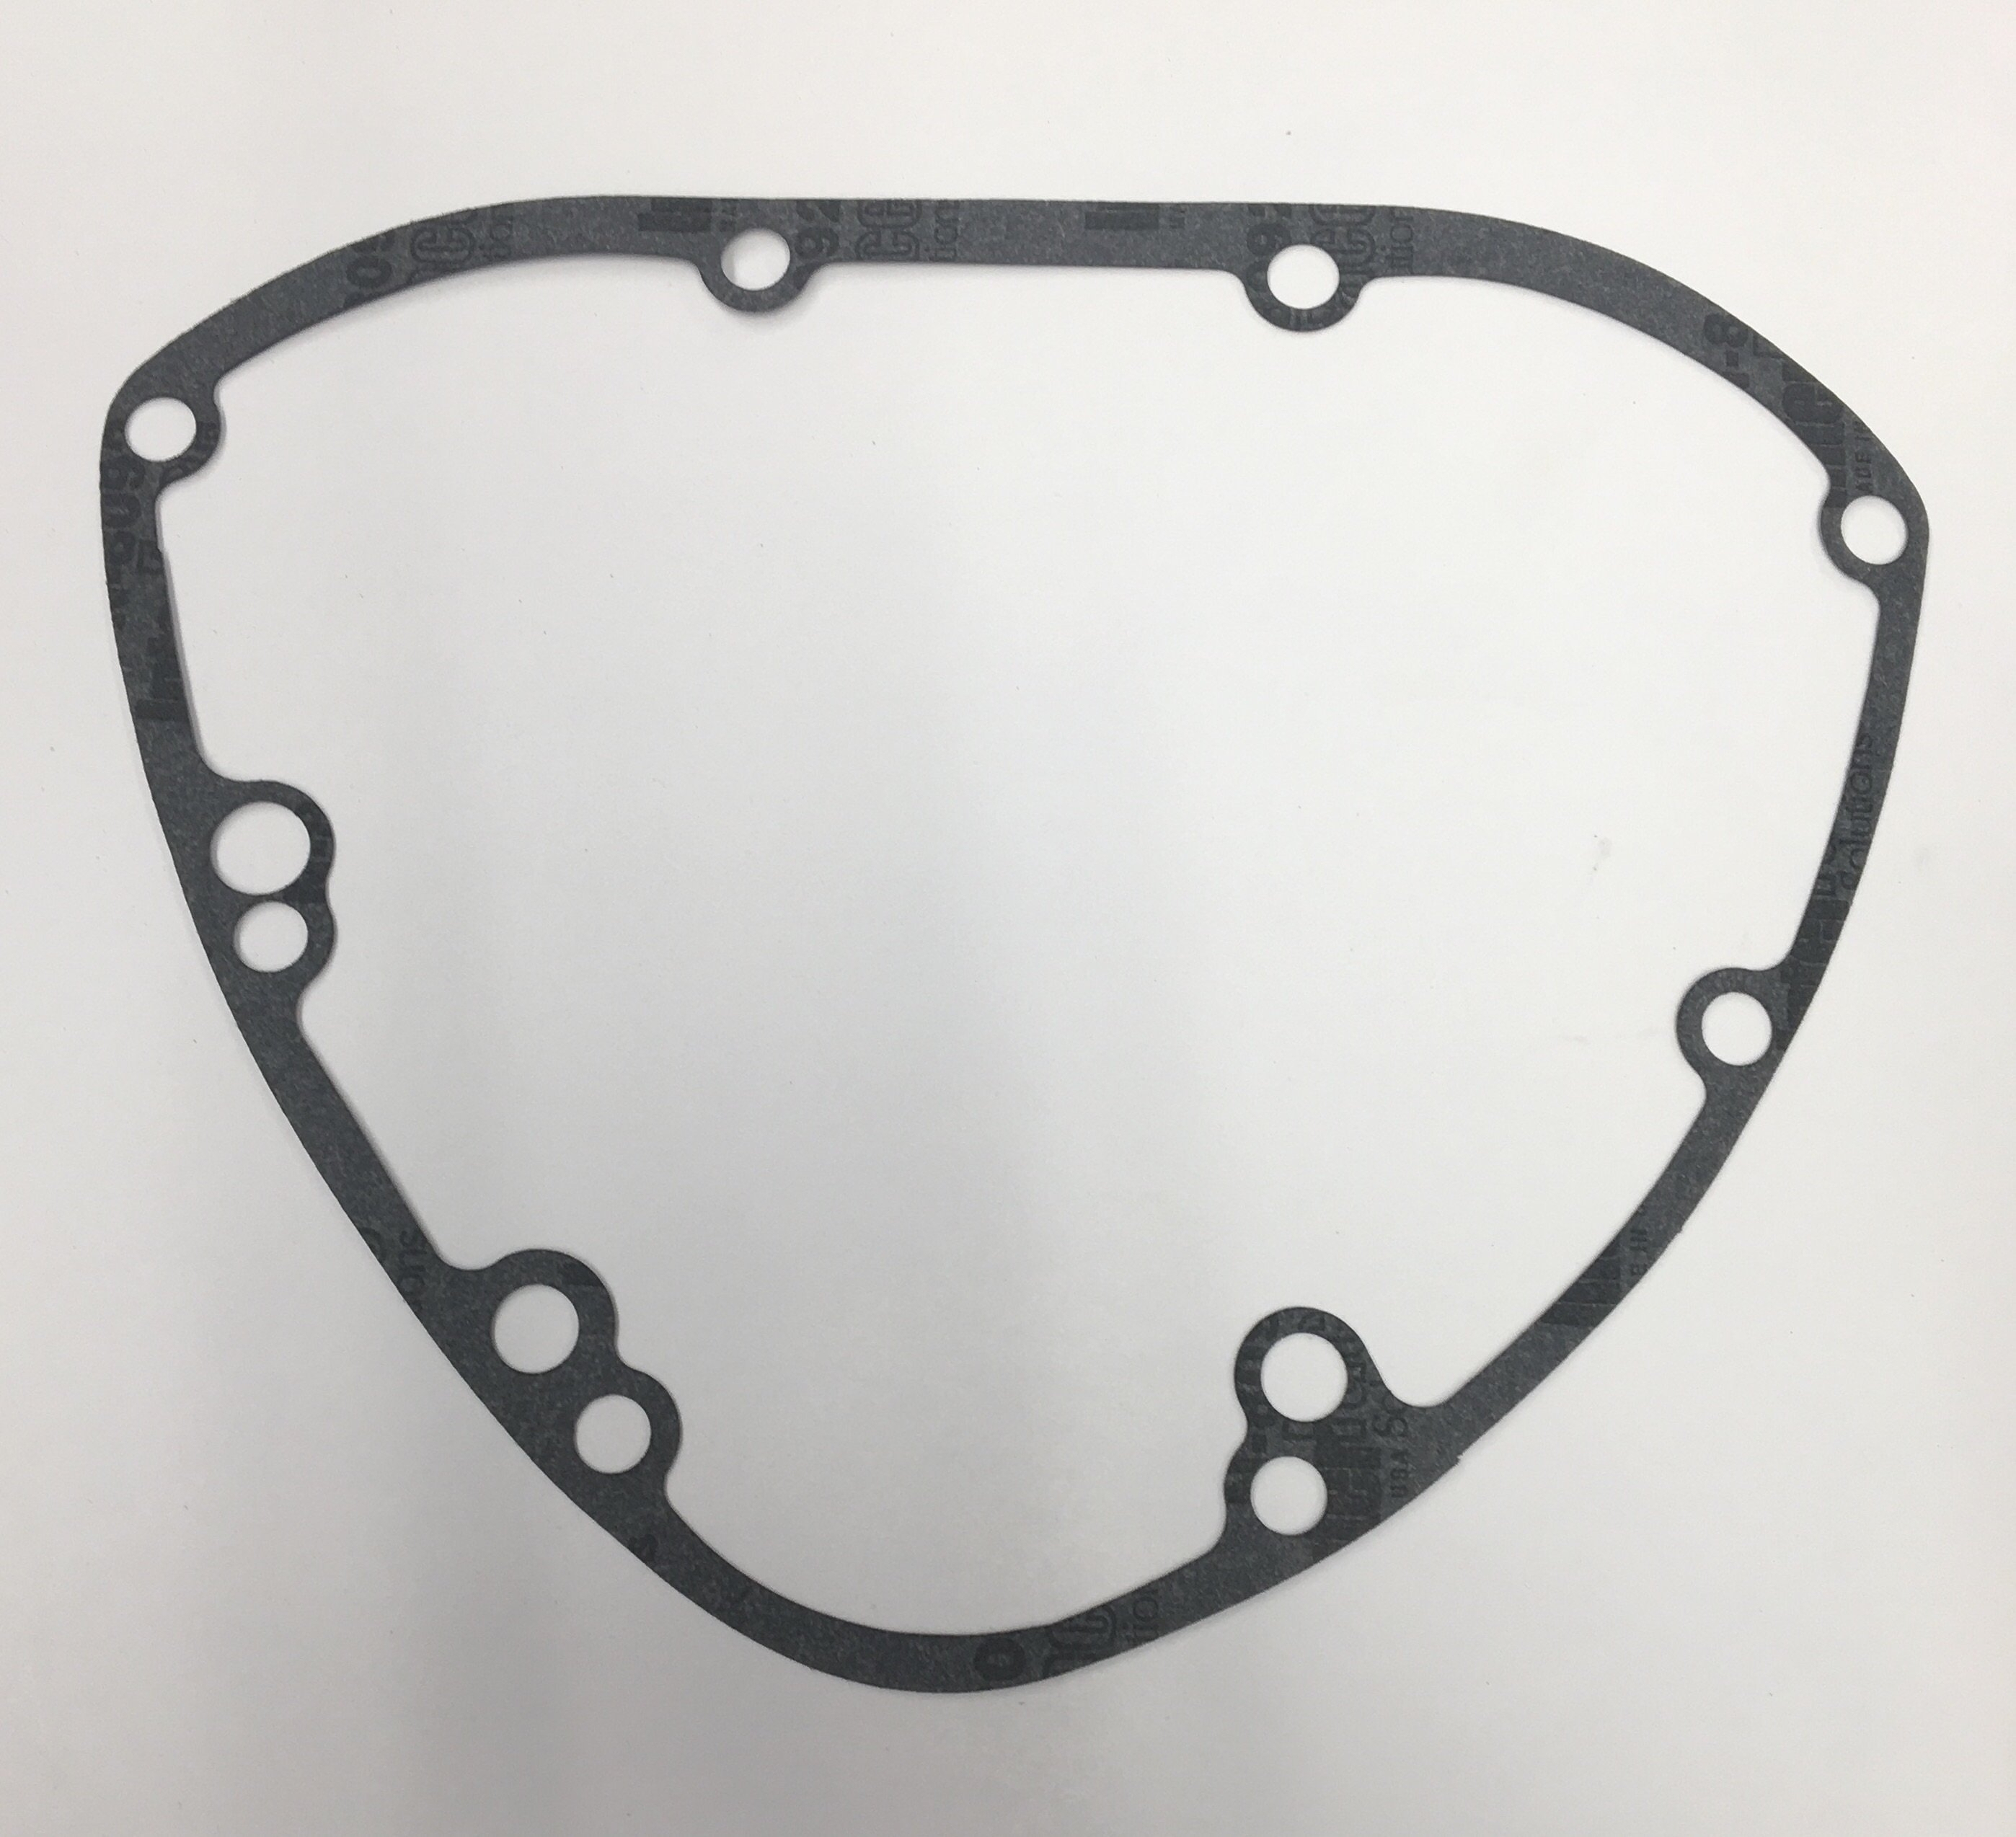 Triumph timing cover gasket 650 750 1963-1980